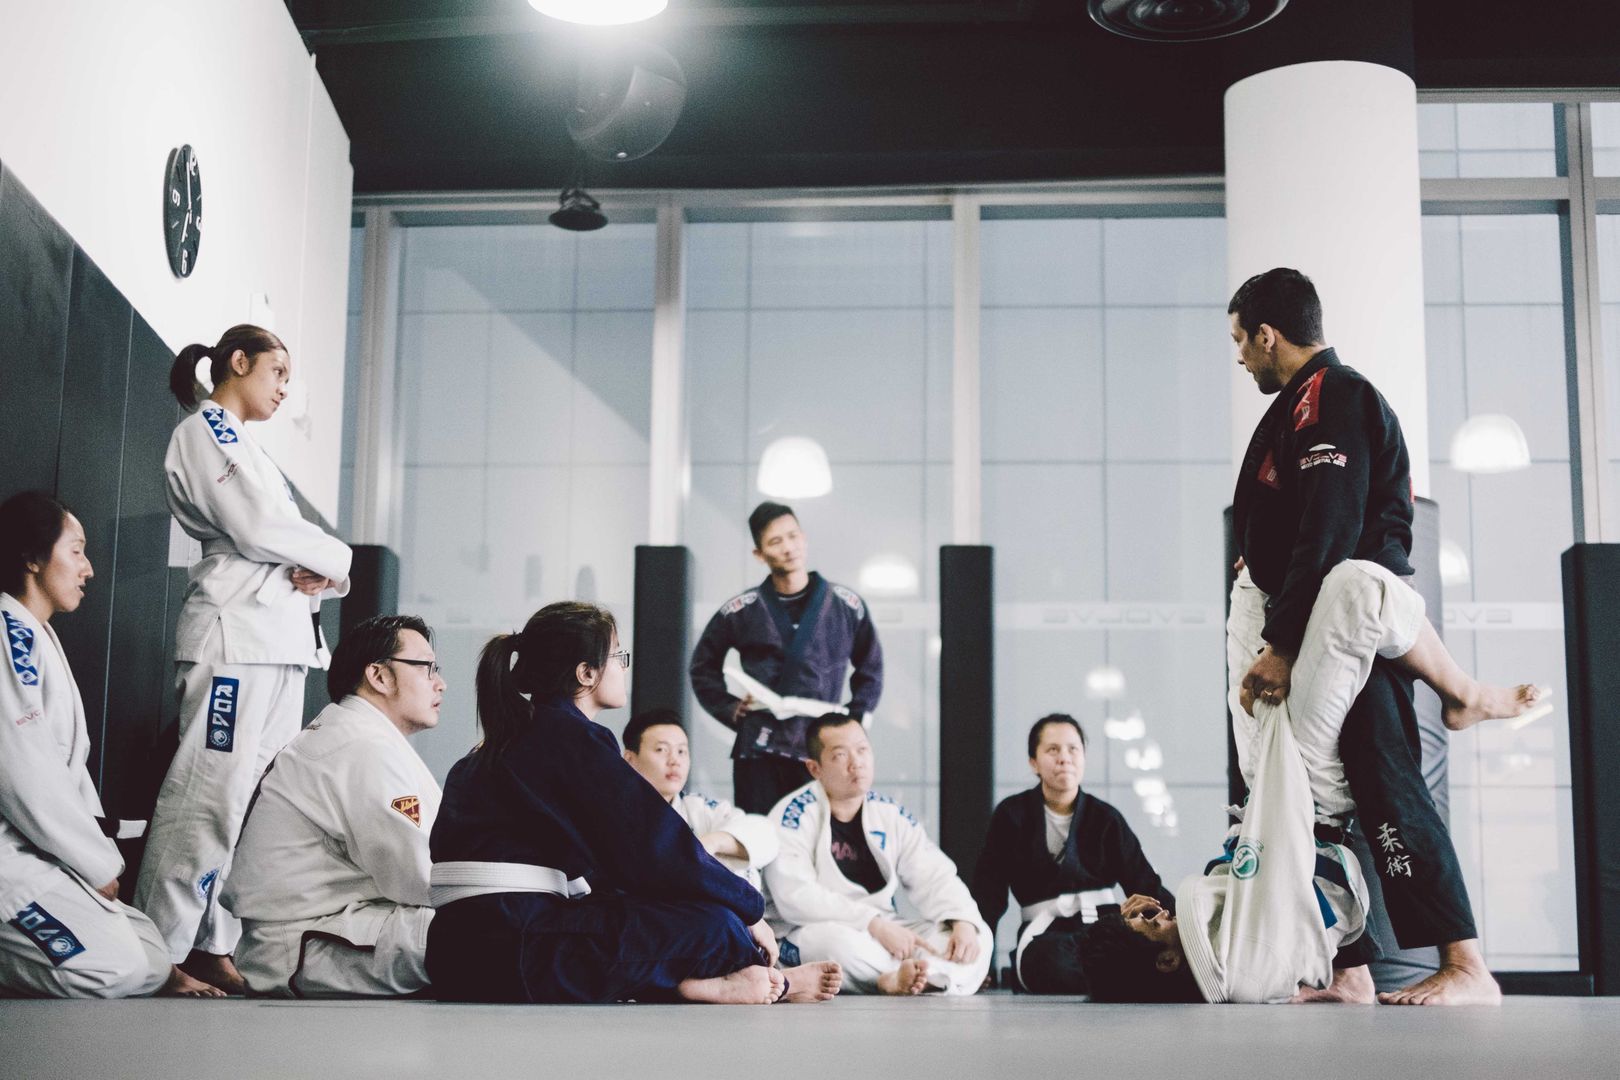 There's never a dull moment in BJJ, with the many different techniques to learn.